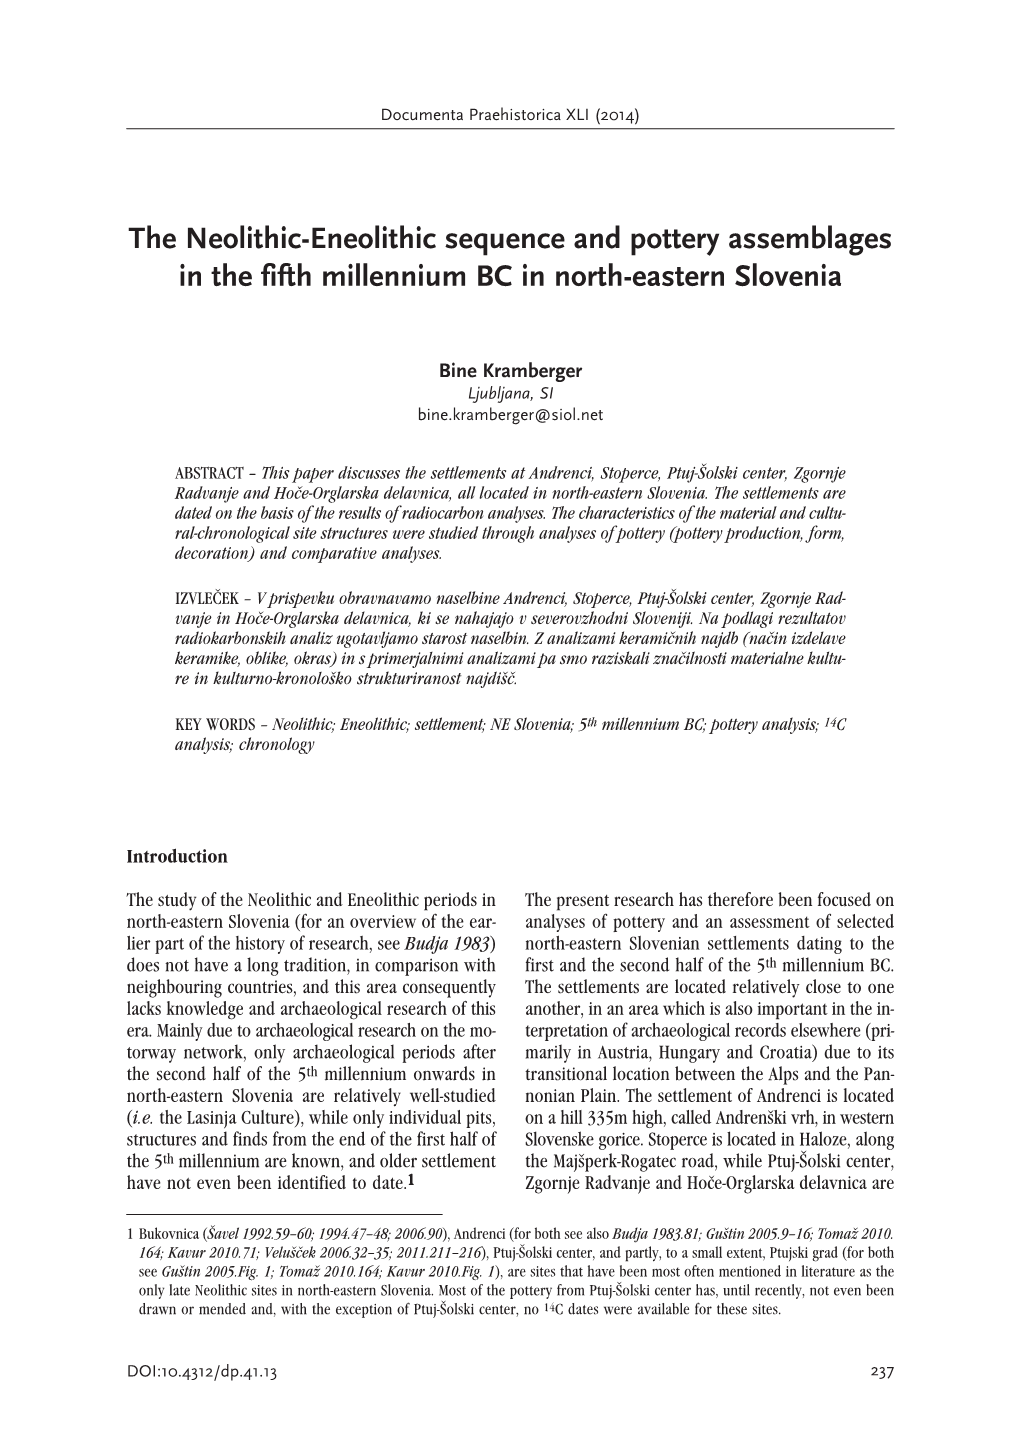 The Neolithic-Eneolithic Sequence and Pottery Assemblages in the Fifth Millennium BC in North-Eastern Slovenia